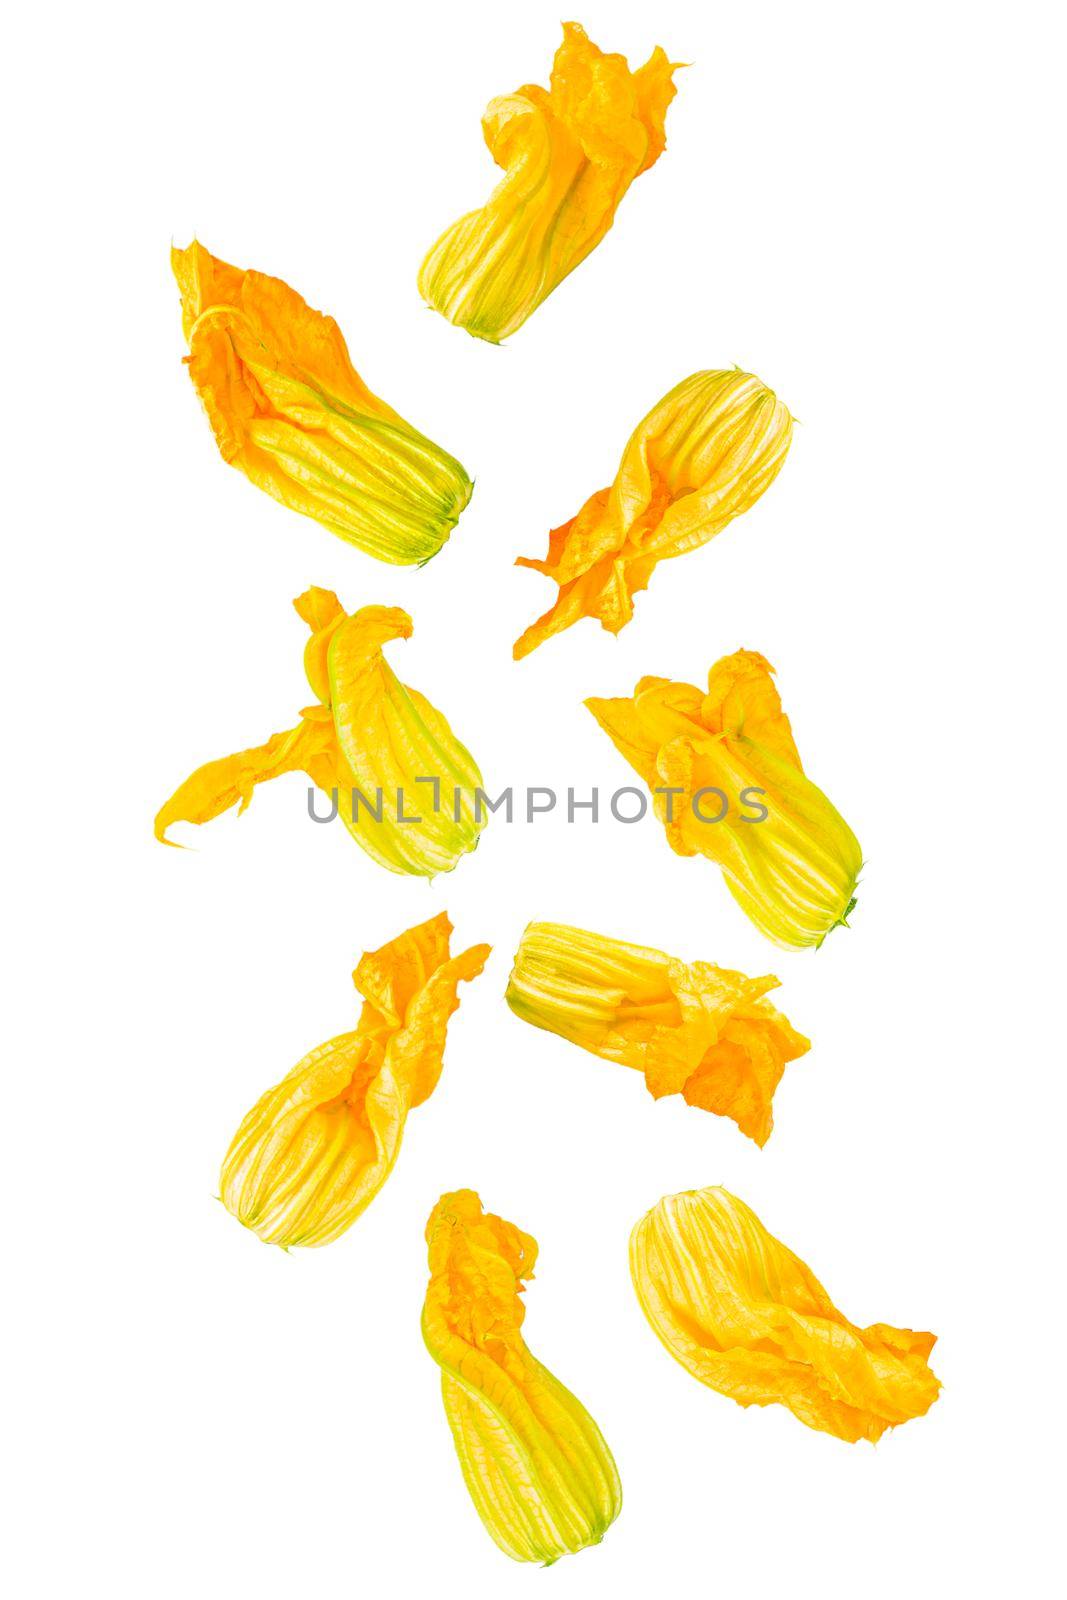 Isolated flying vegetables. Nine courgette flowers falling on white background with clipping path as package design element and advertising. Full depth of field.